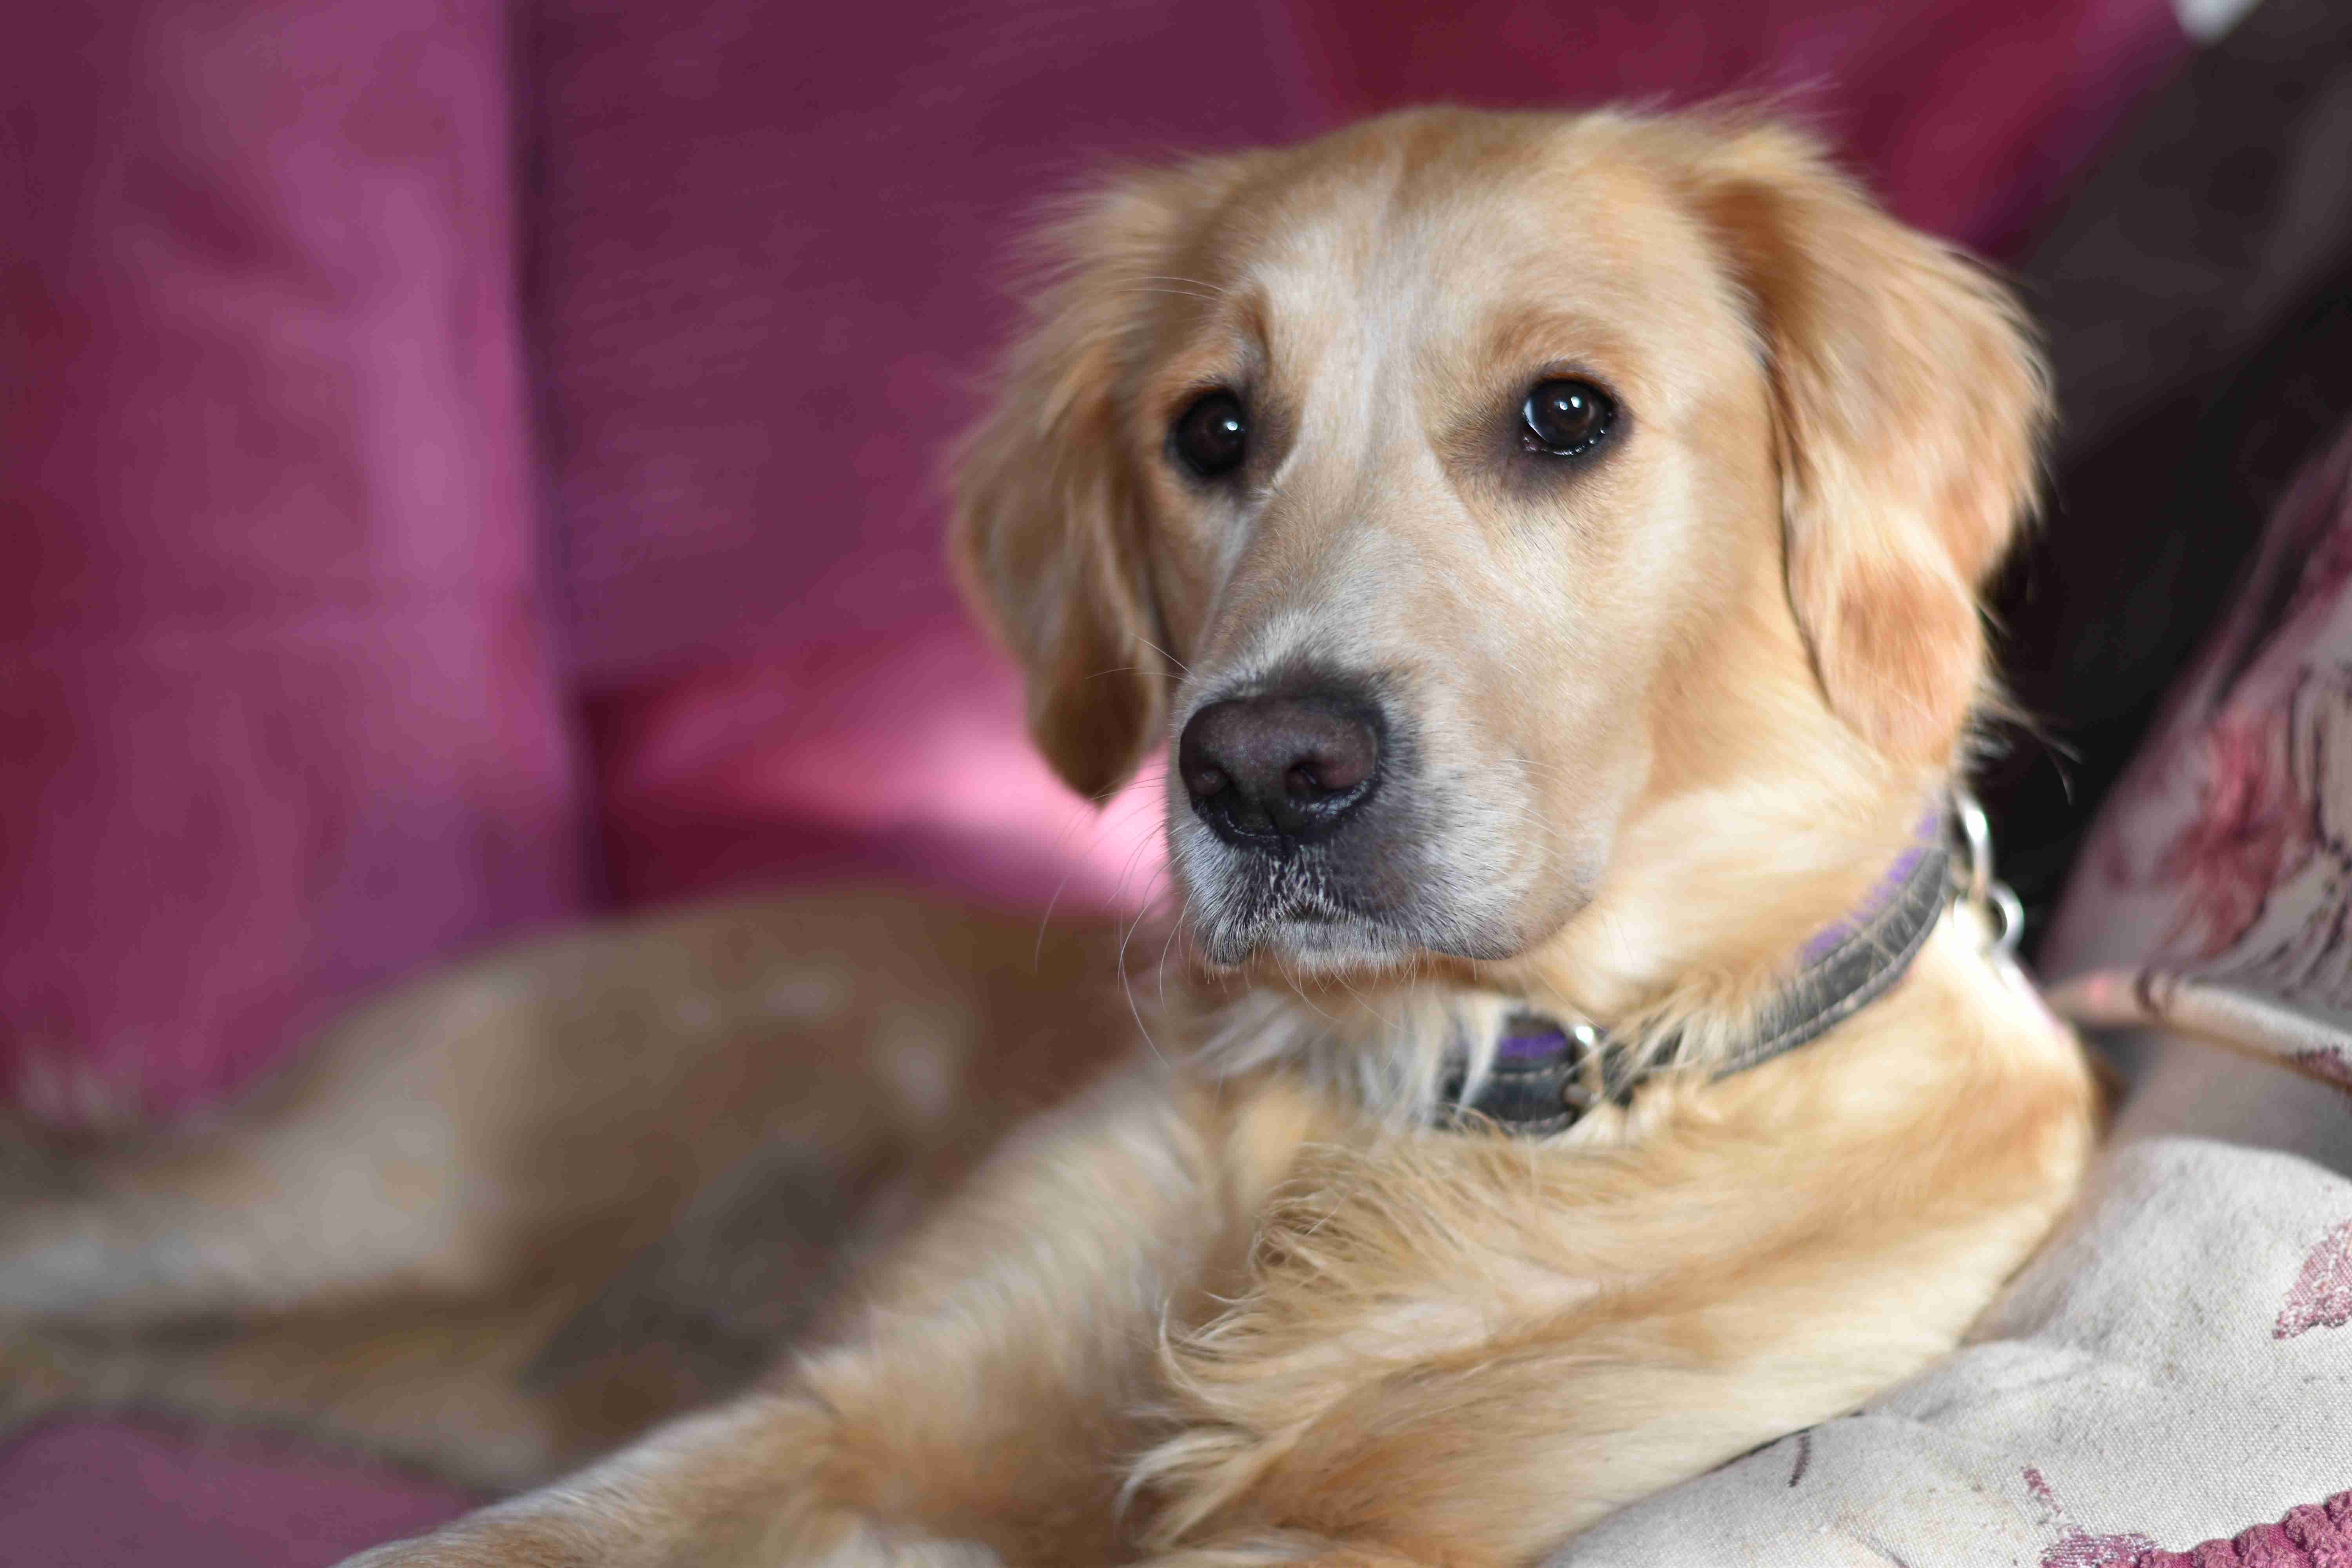 What are the most common health issues that golden retrievers face?